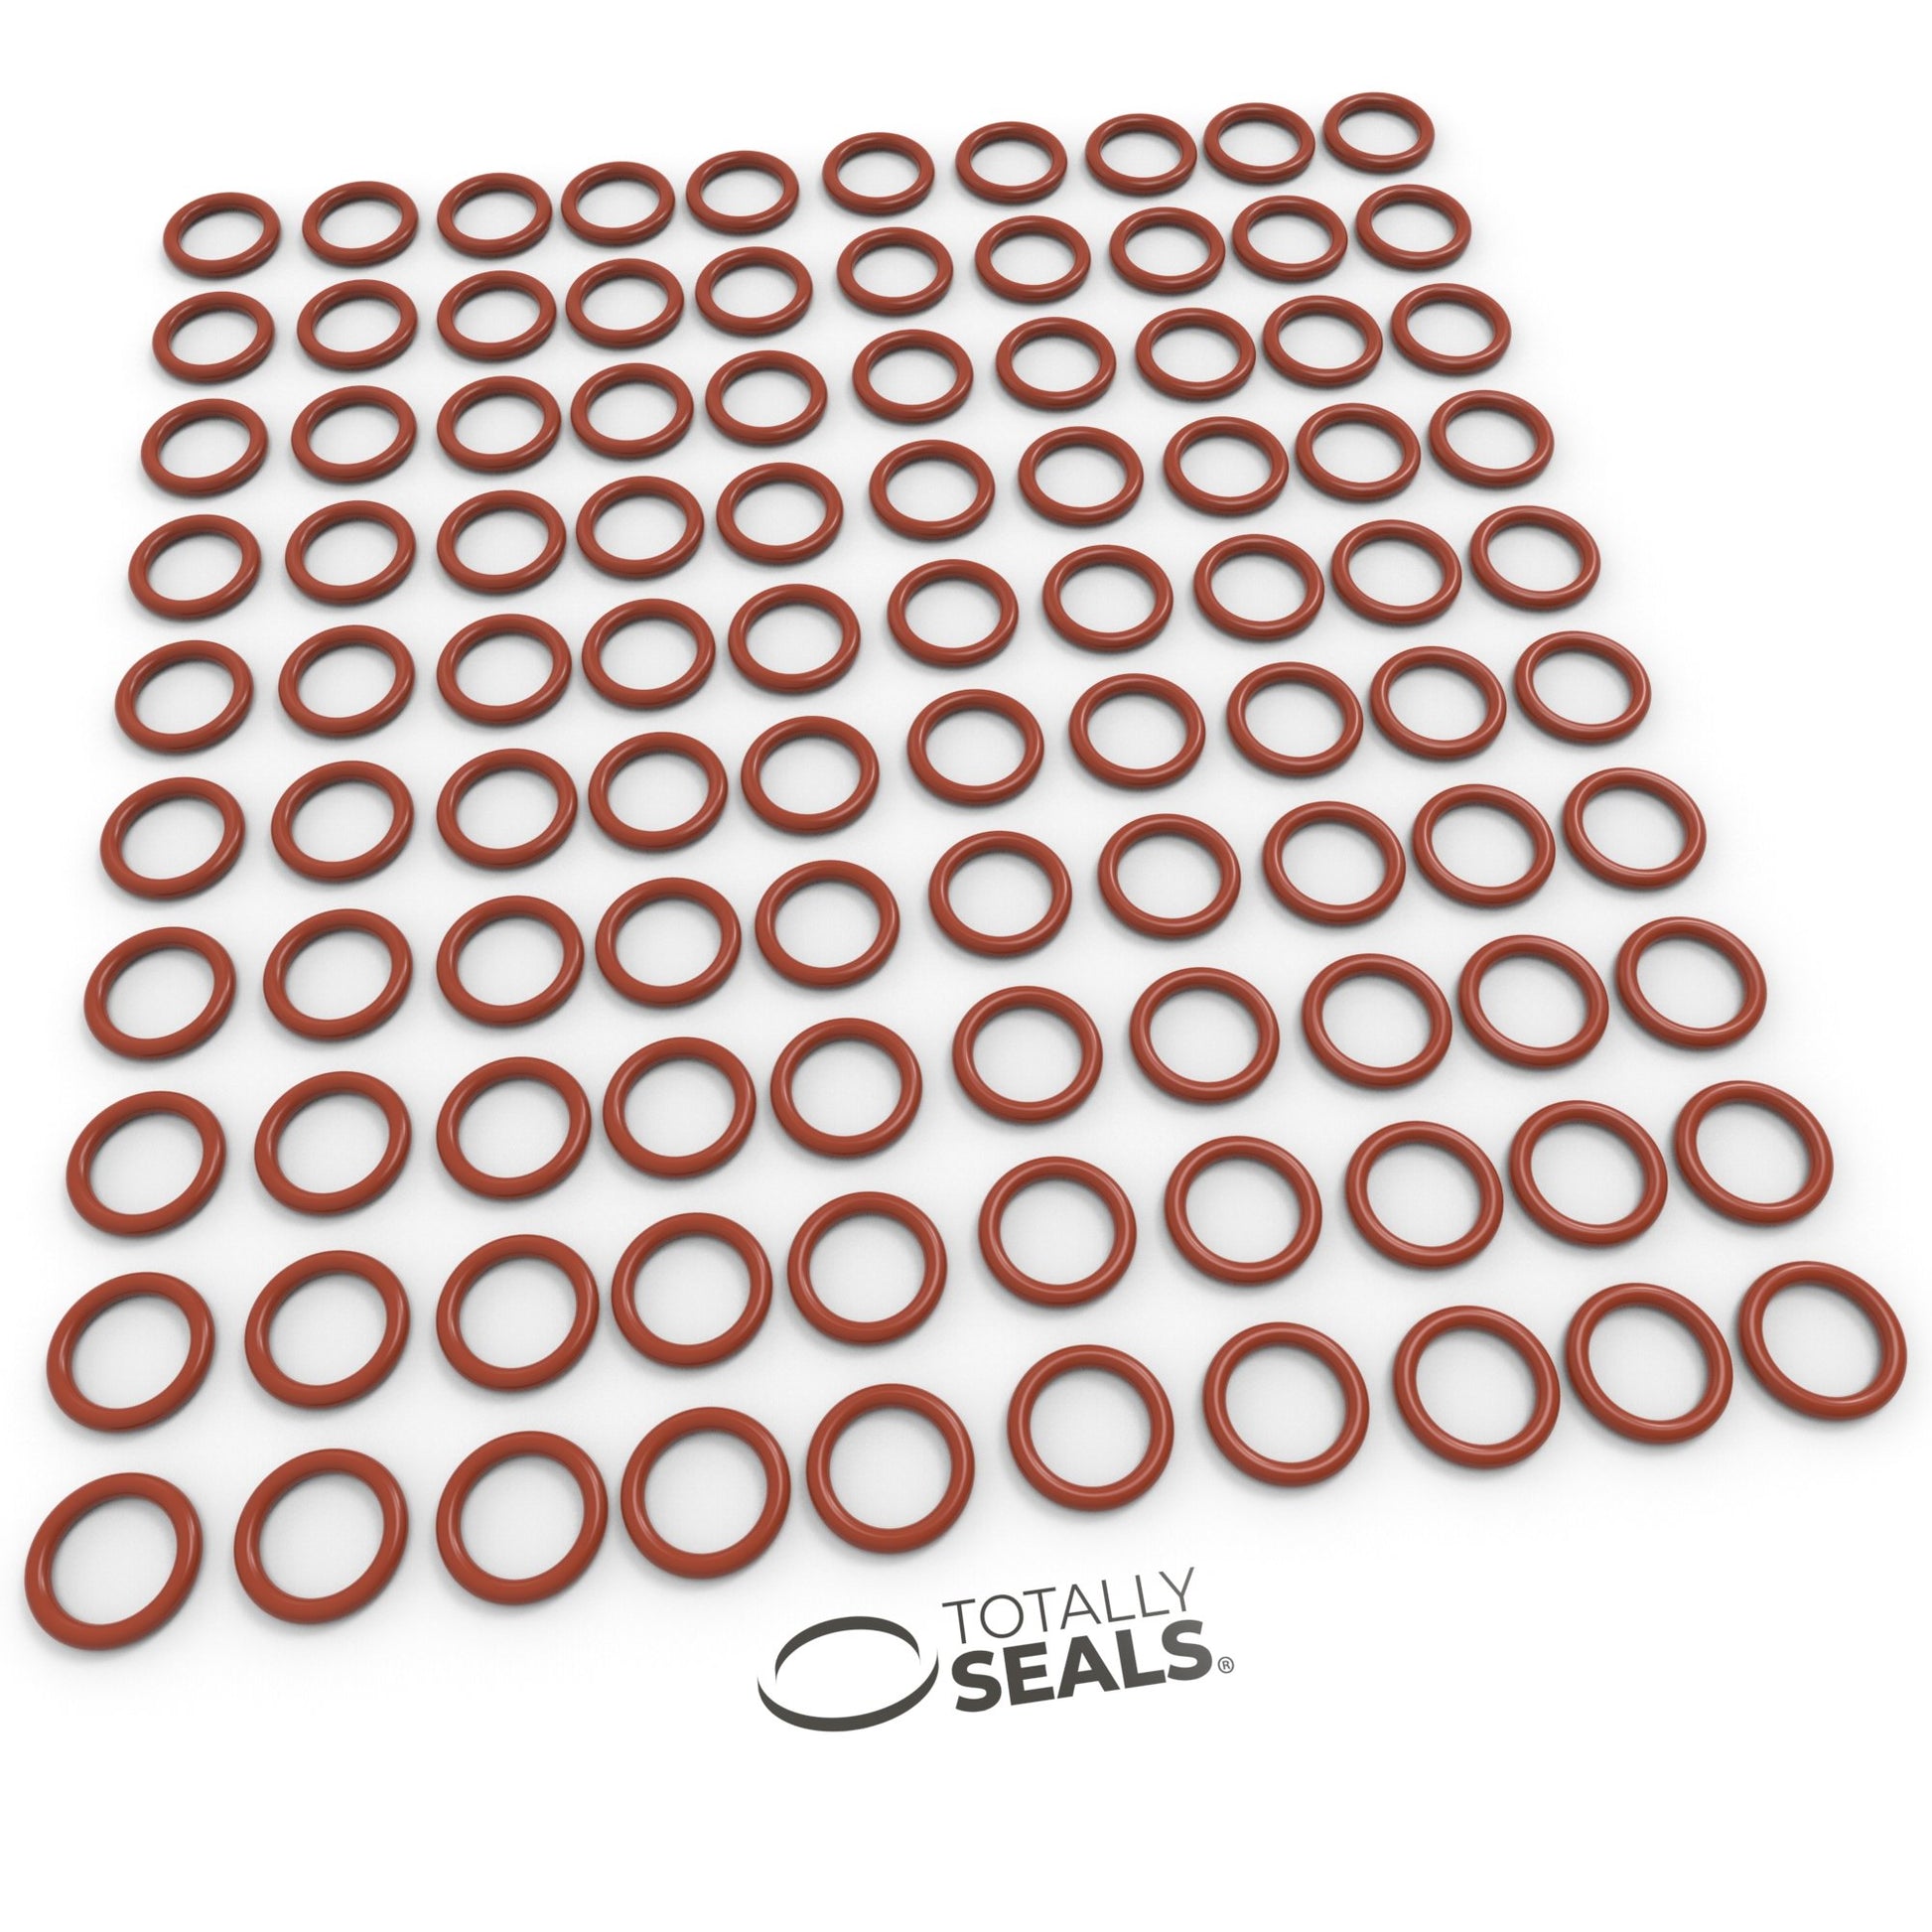 8mm x 3mm (14mm OD) Silicone O-Rings - Totally Seals®